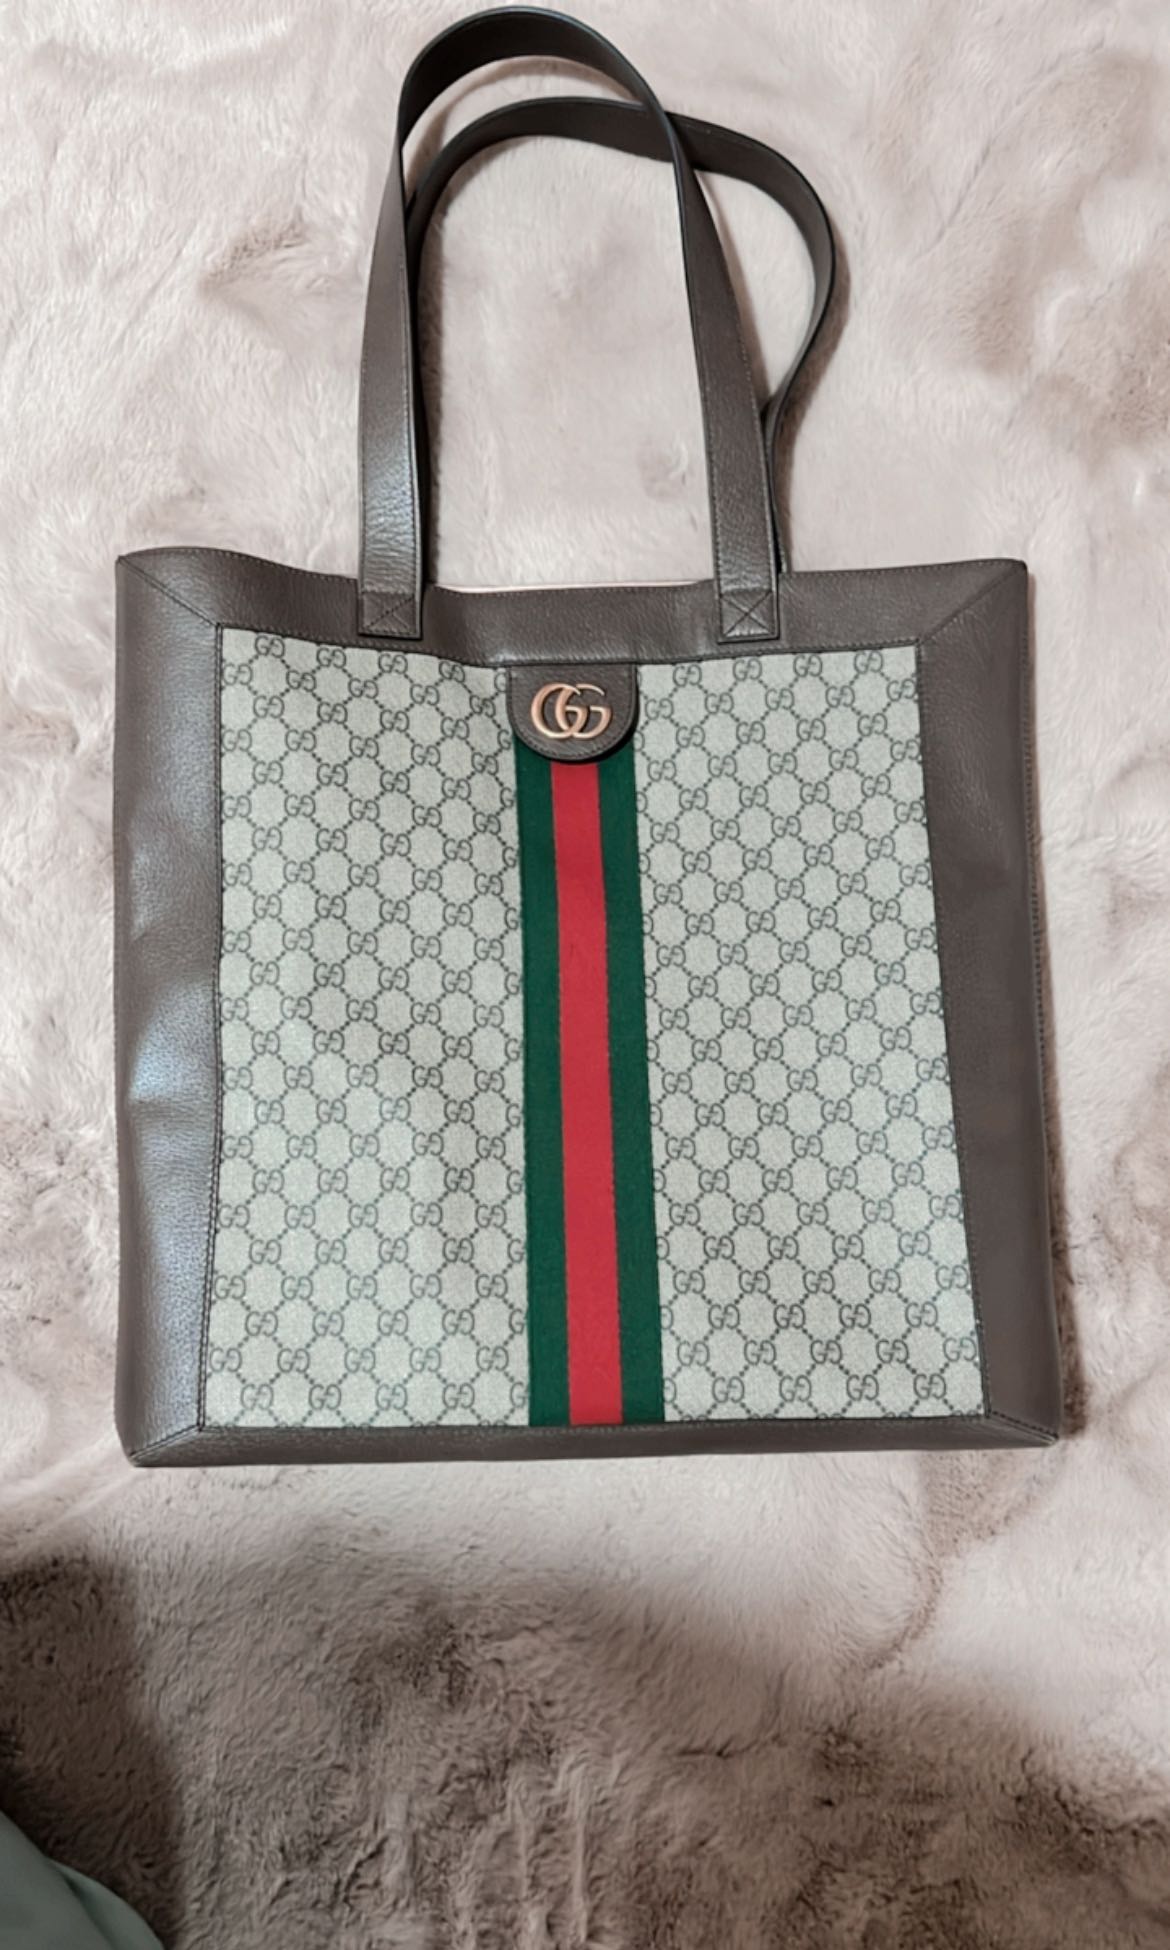 Ophidia GG Large Toiletry Bag in Beige - Gucci